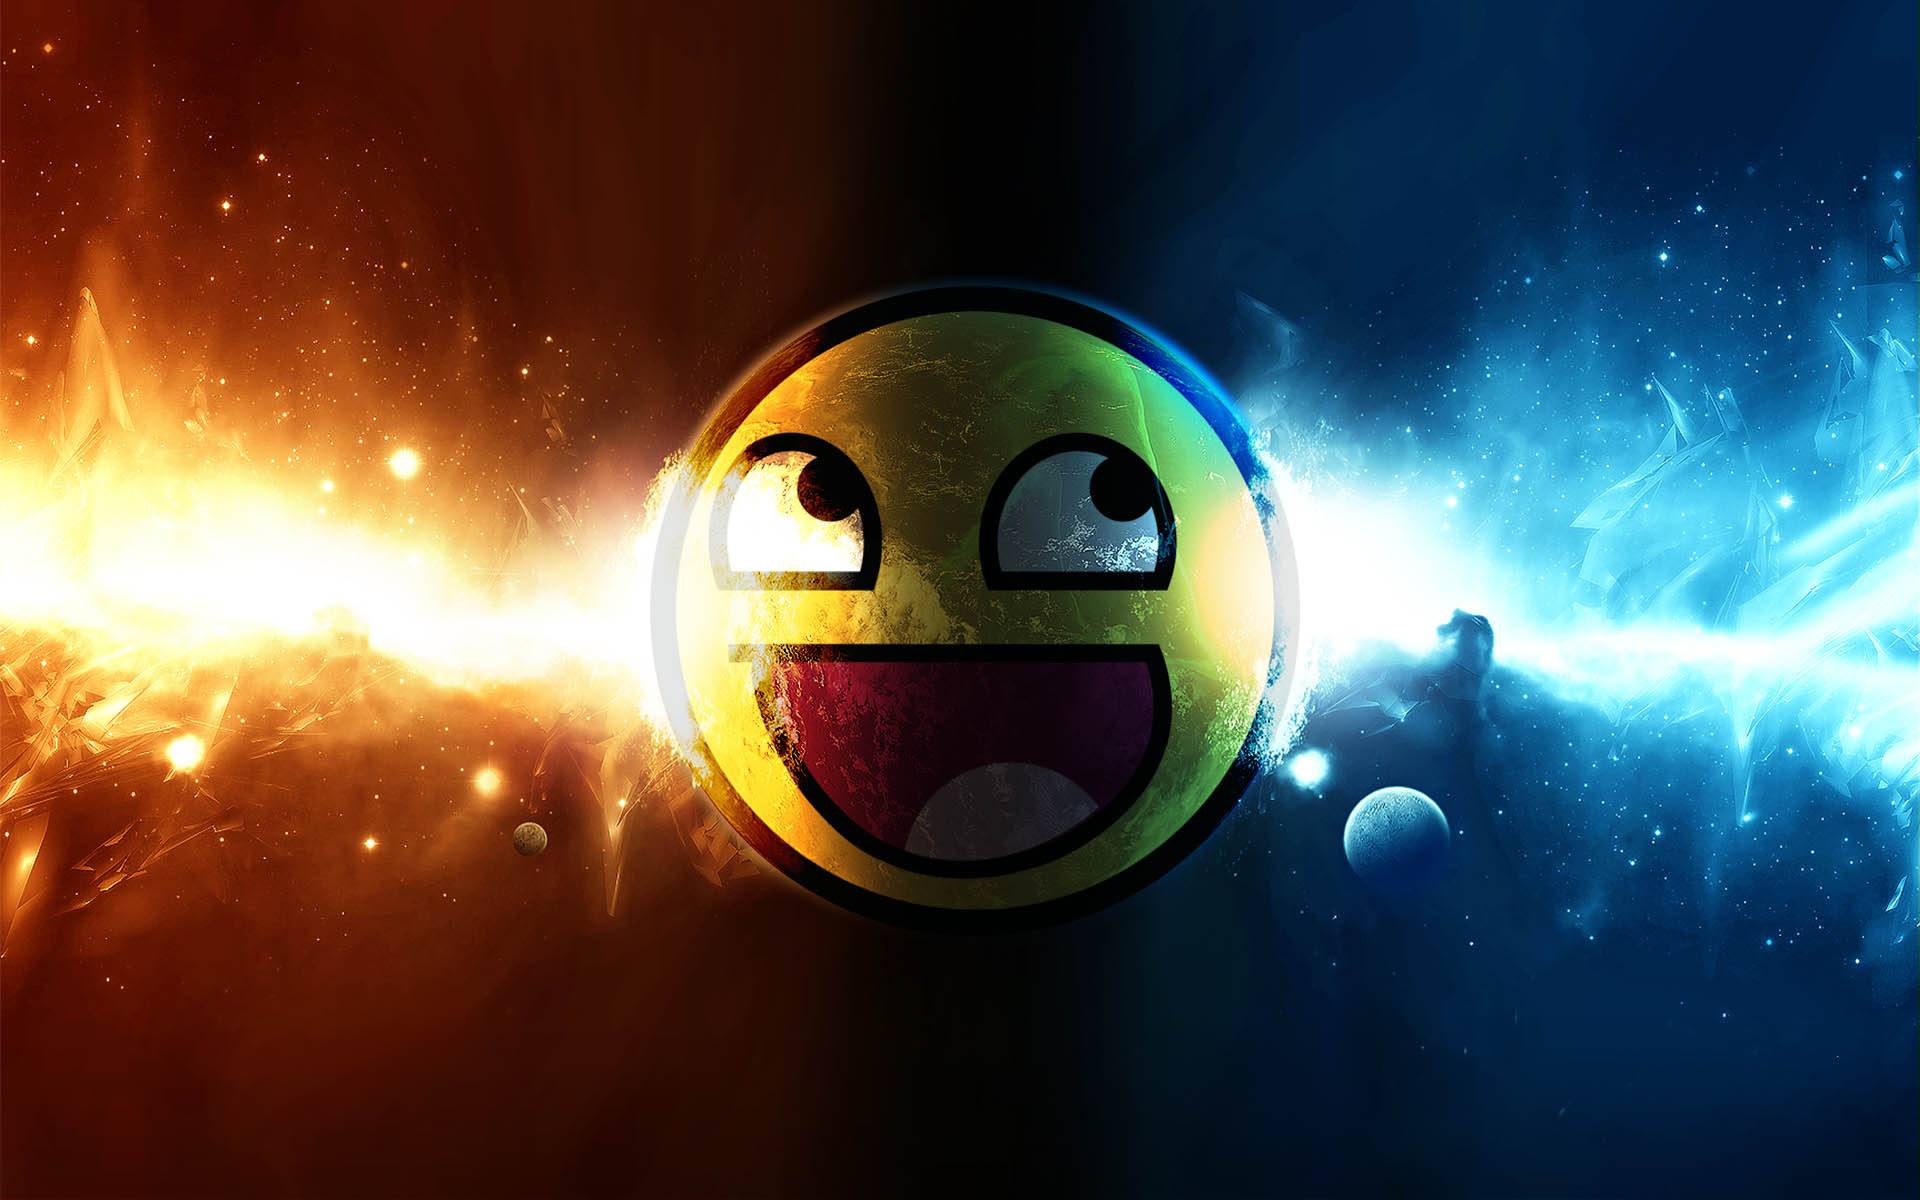 Awesome Smiley Background Hd Wallpapers in Others Imagescicom